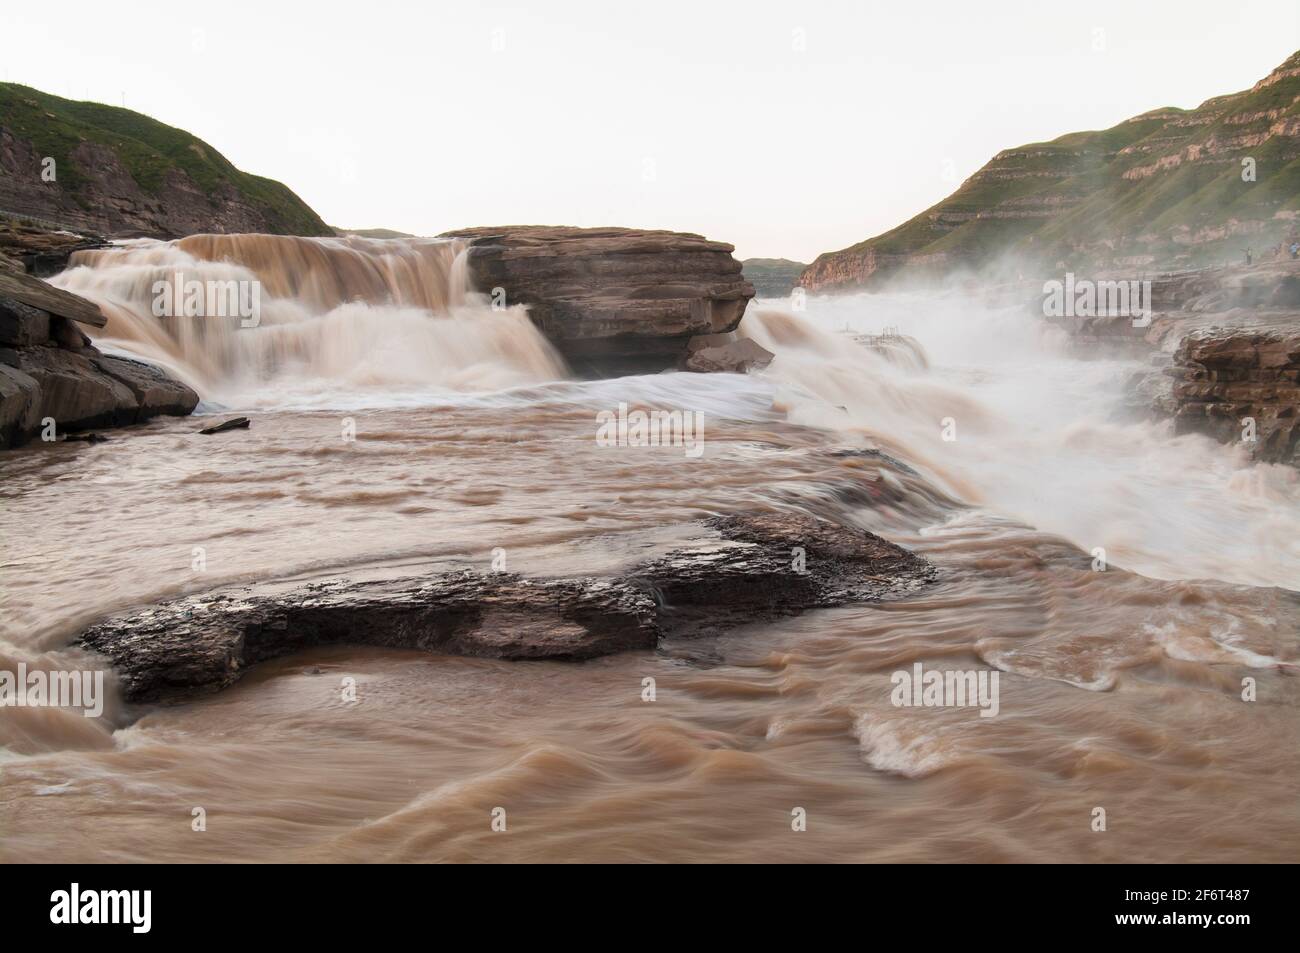 The Hukou Waterfall, the largest waterfall on the Yellow River, China, the second largest waterfall in China, is located at the intersection of Stock Photo